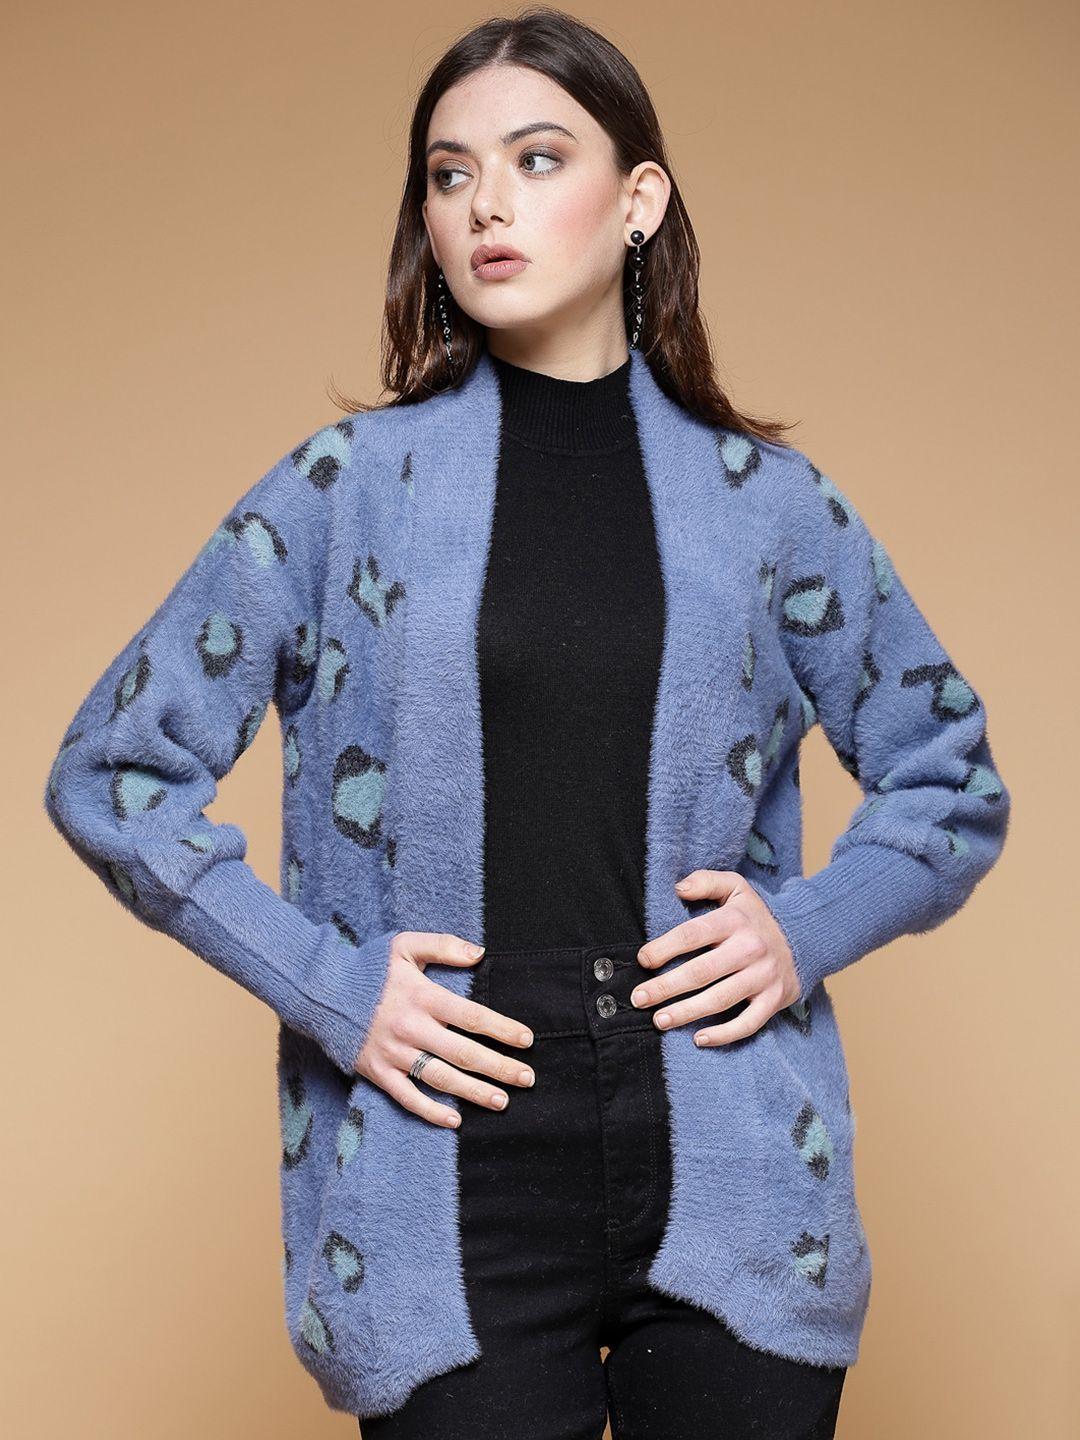 juelle abstract printed open front shrug